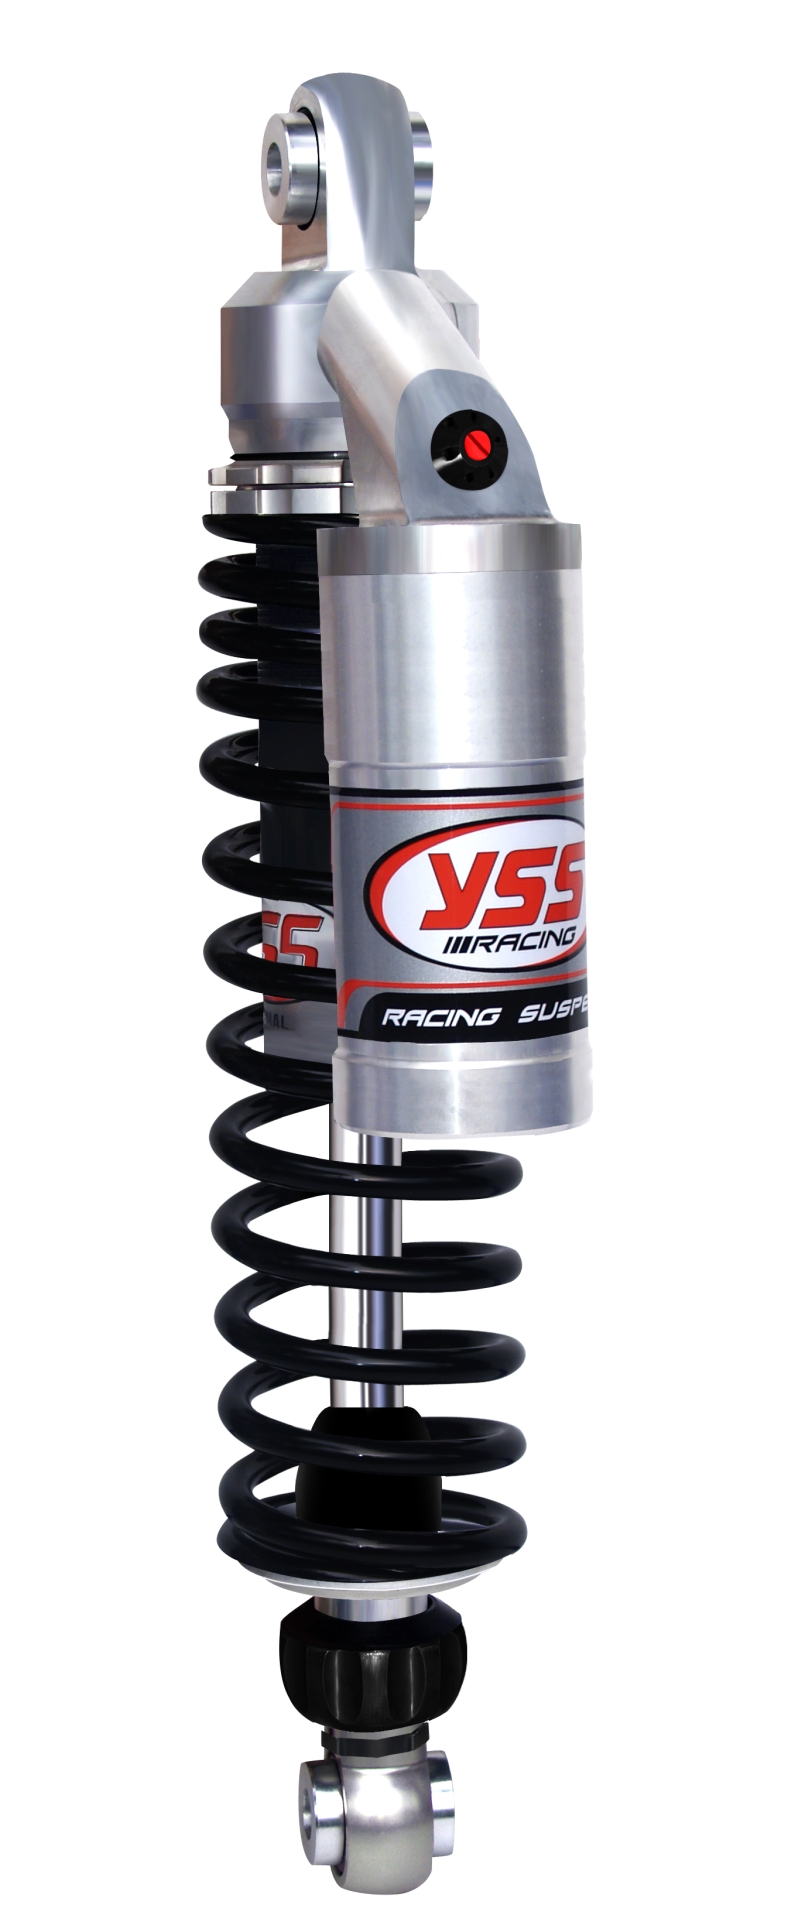 YSS Shock Absorbers - Rubber Chicken Racing Garage: Quality Work